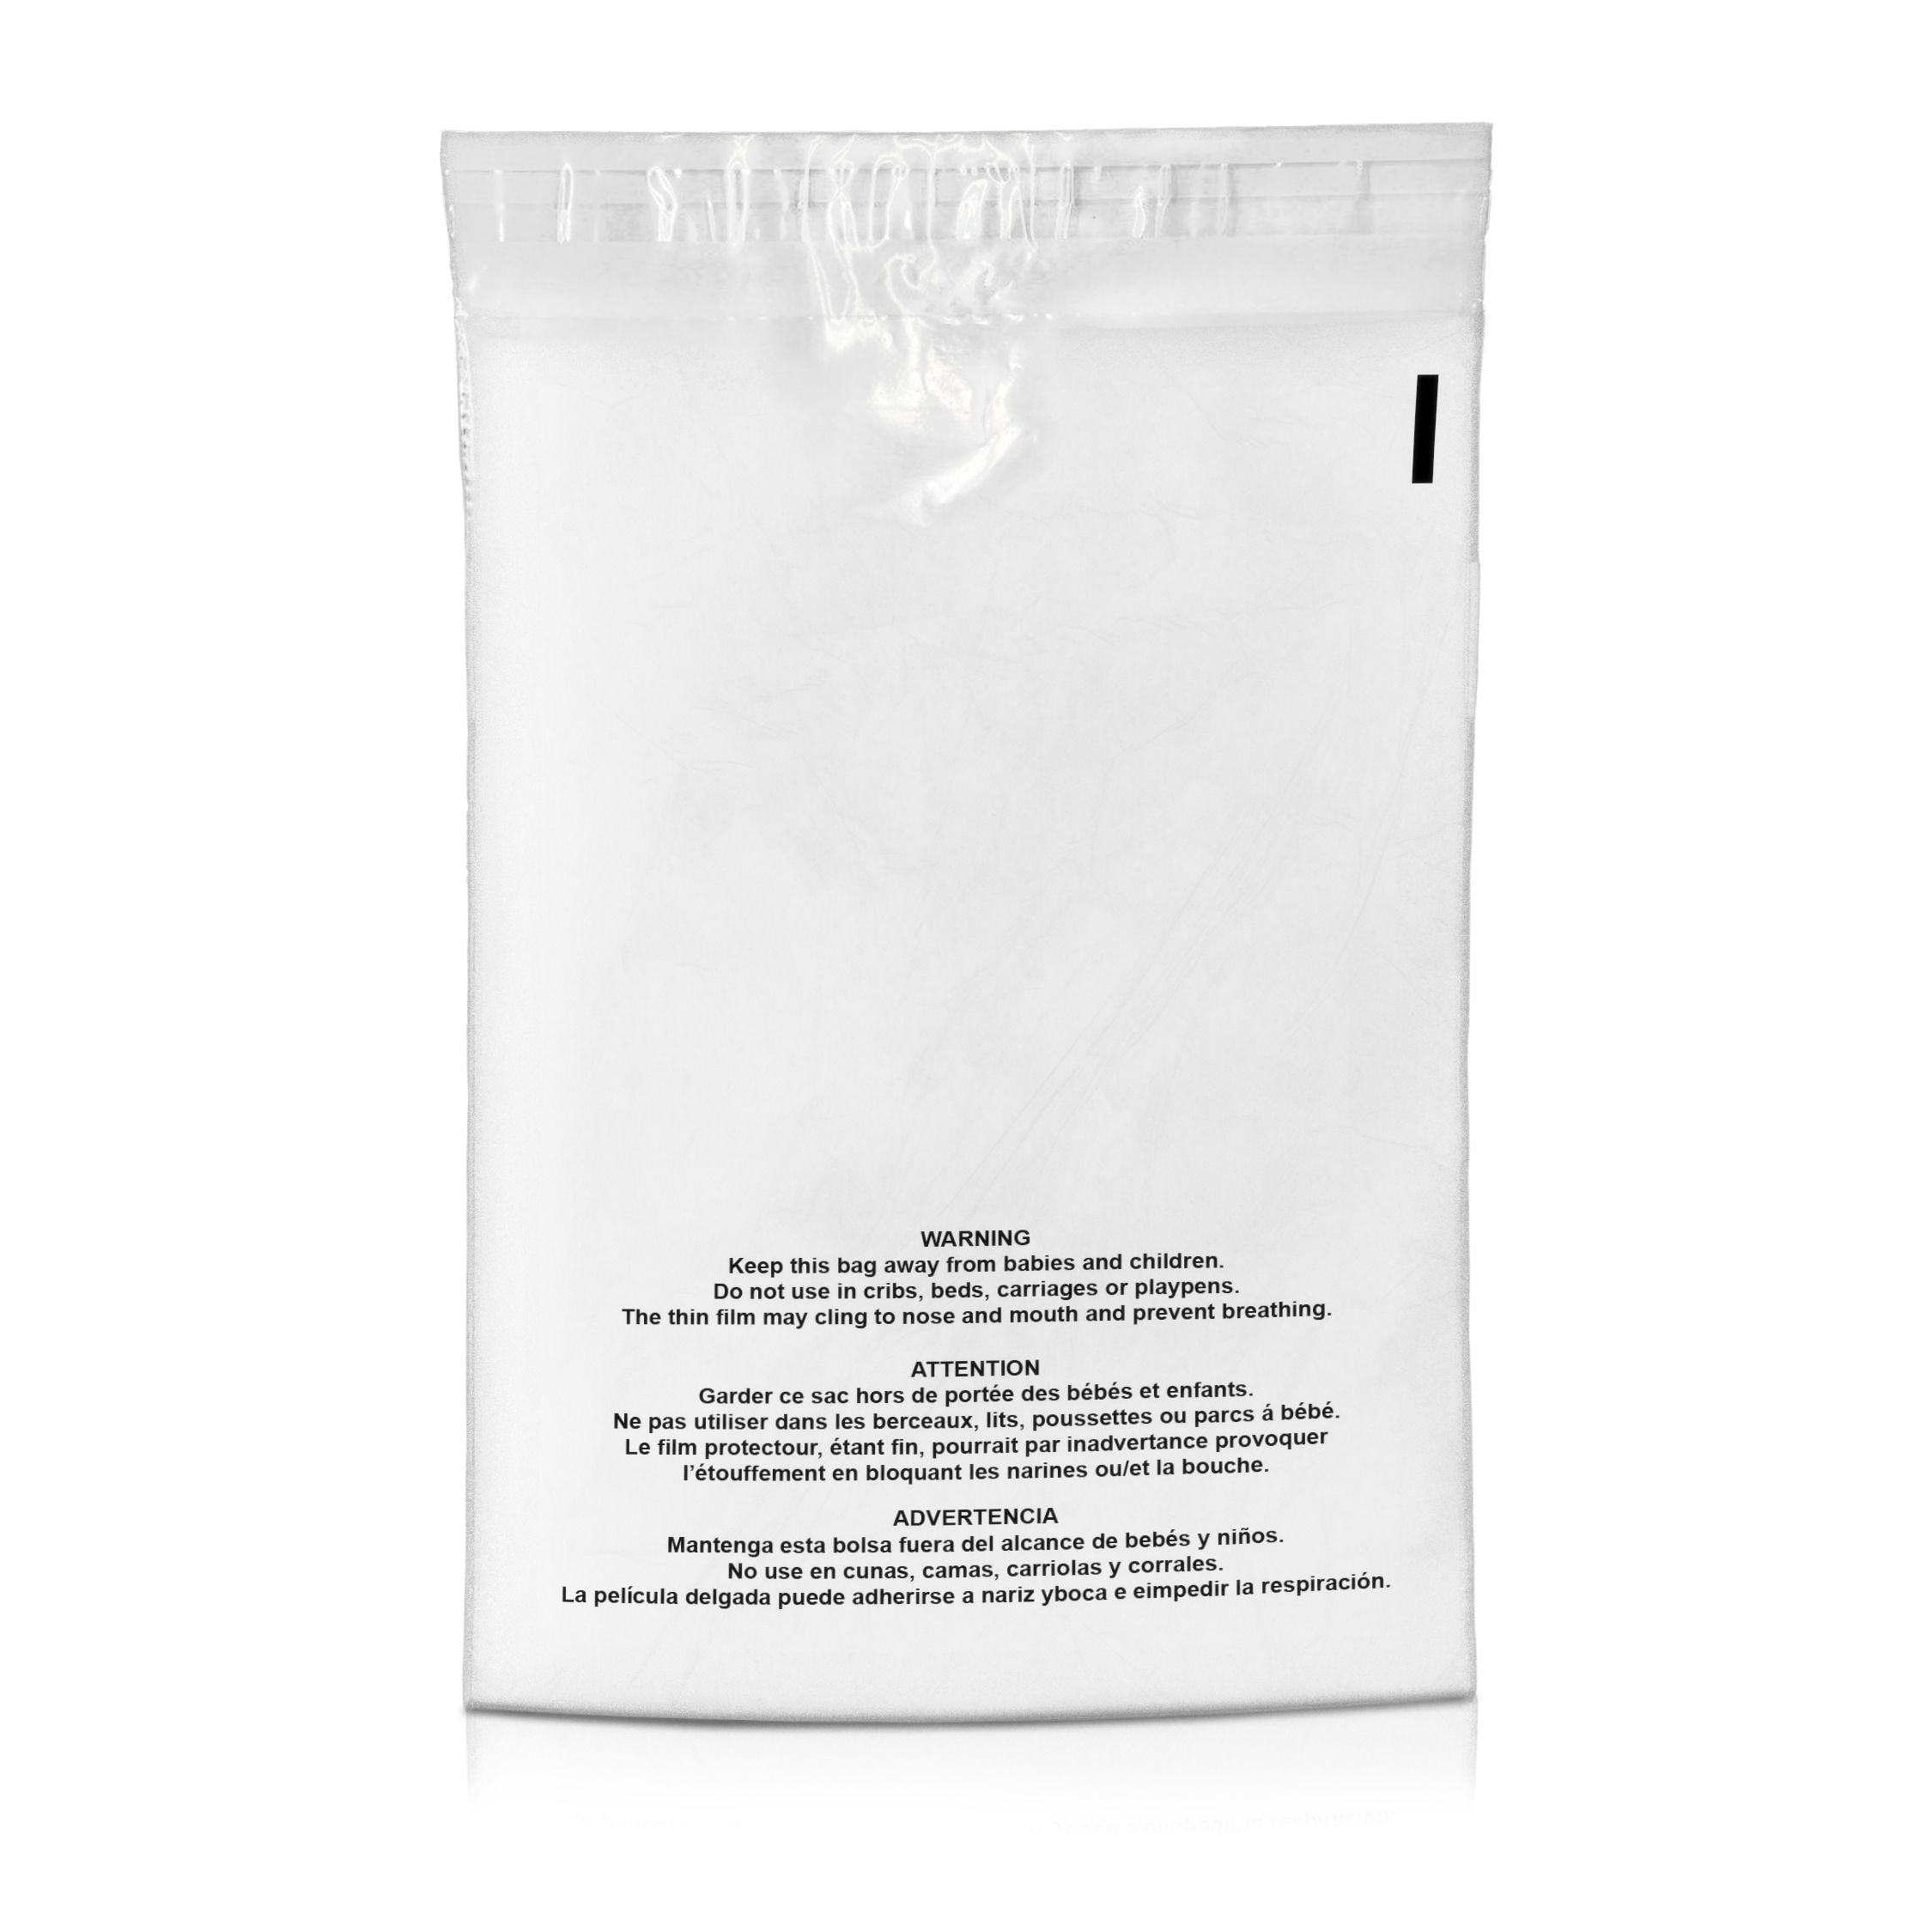 PS 100 Pcs 11x14 FBA Bags Permanent Self Seal Poly Bags with Suffocation Warning Ready to Ship Label Printed Sold As a Set 